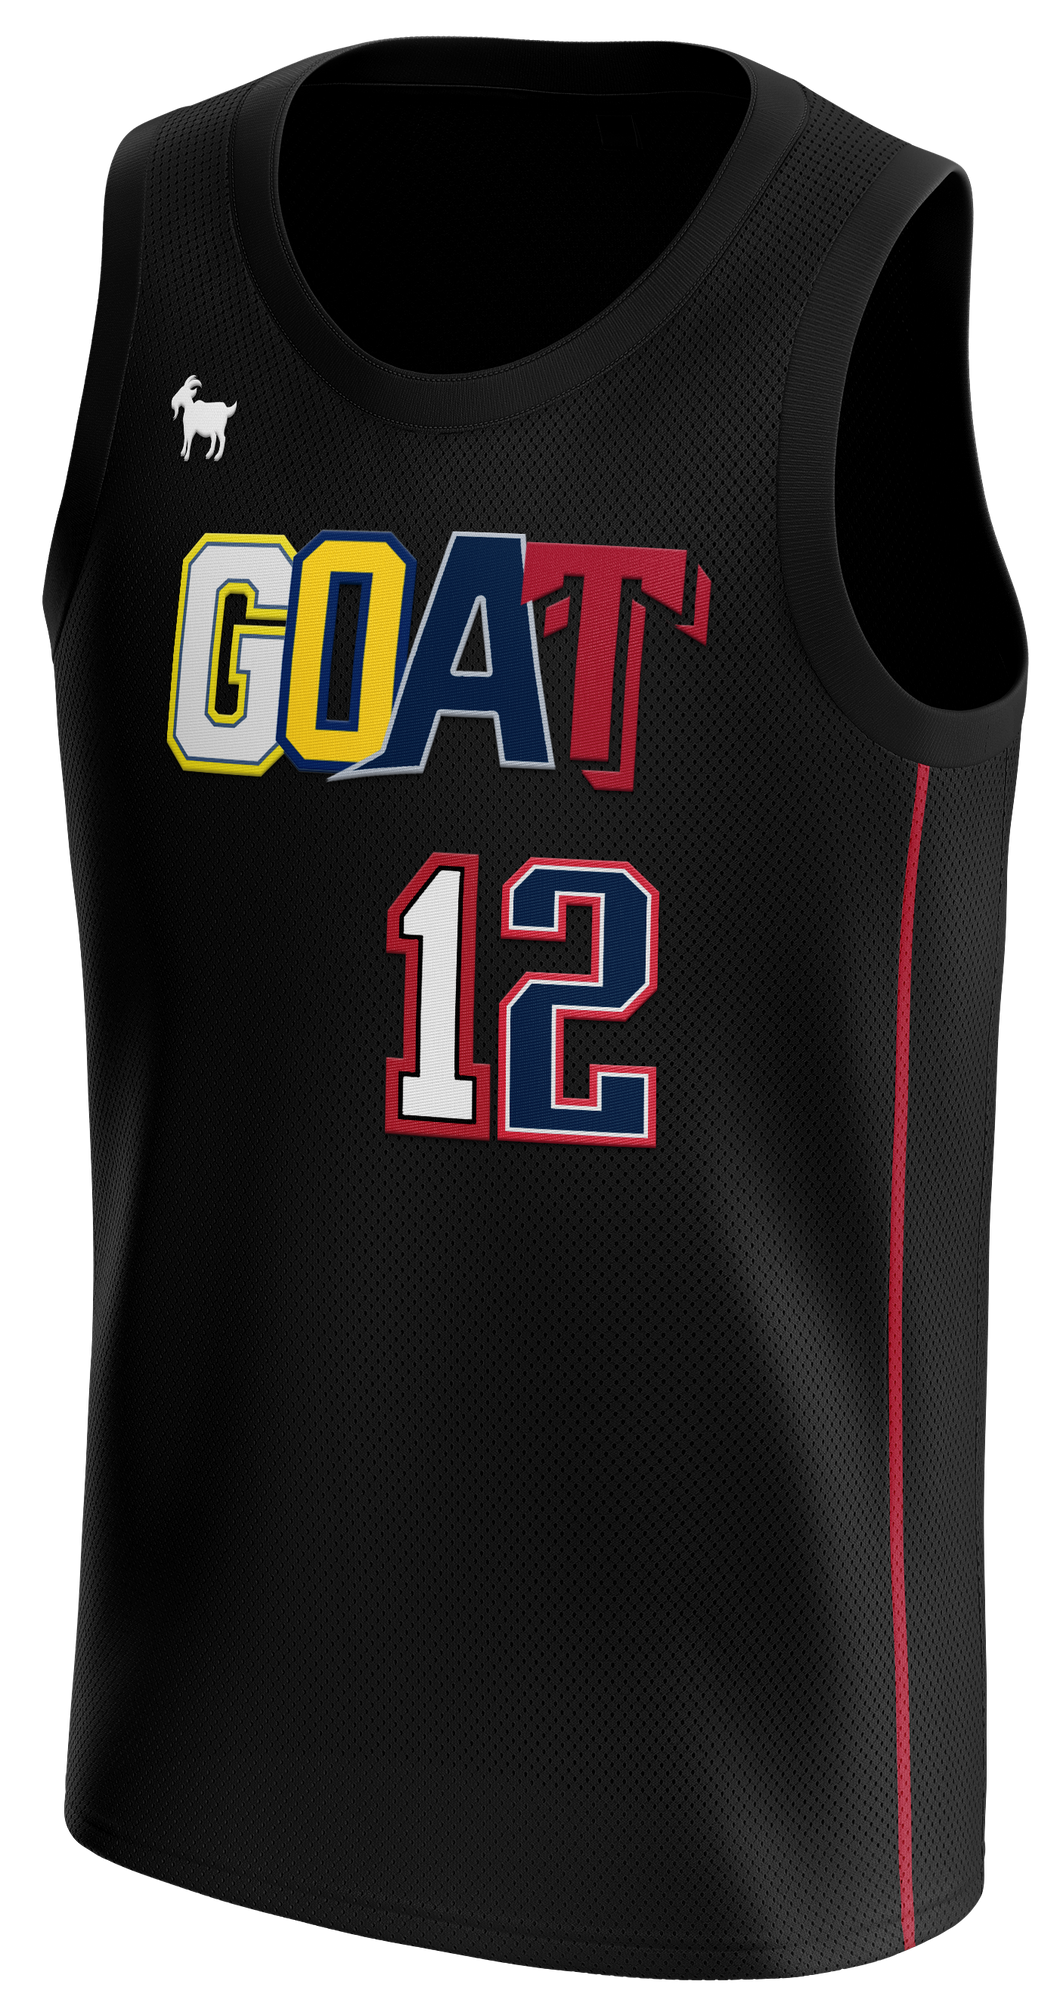 TB12 What the GOAT Mashup Jersey